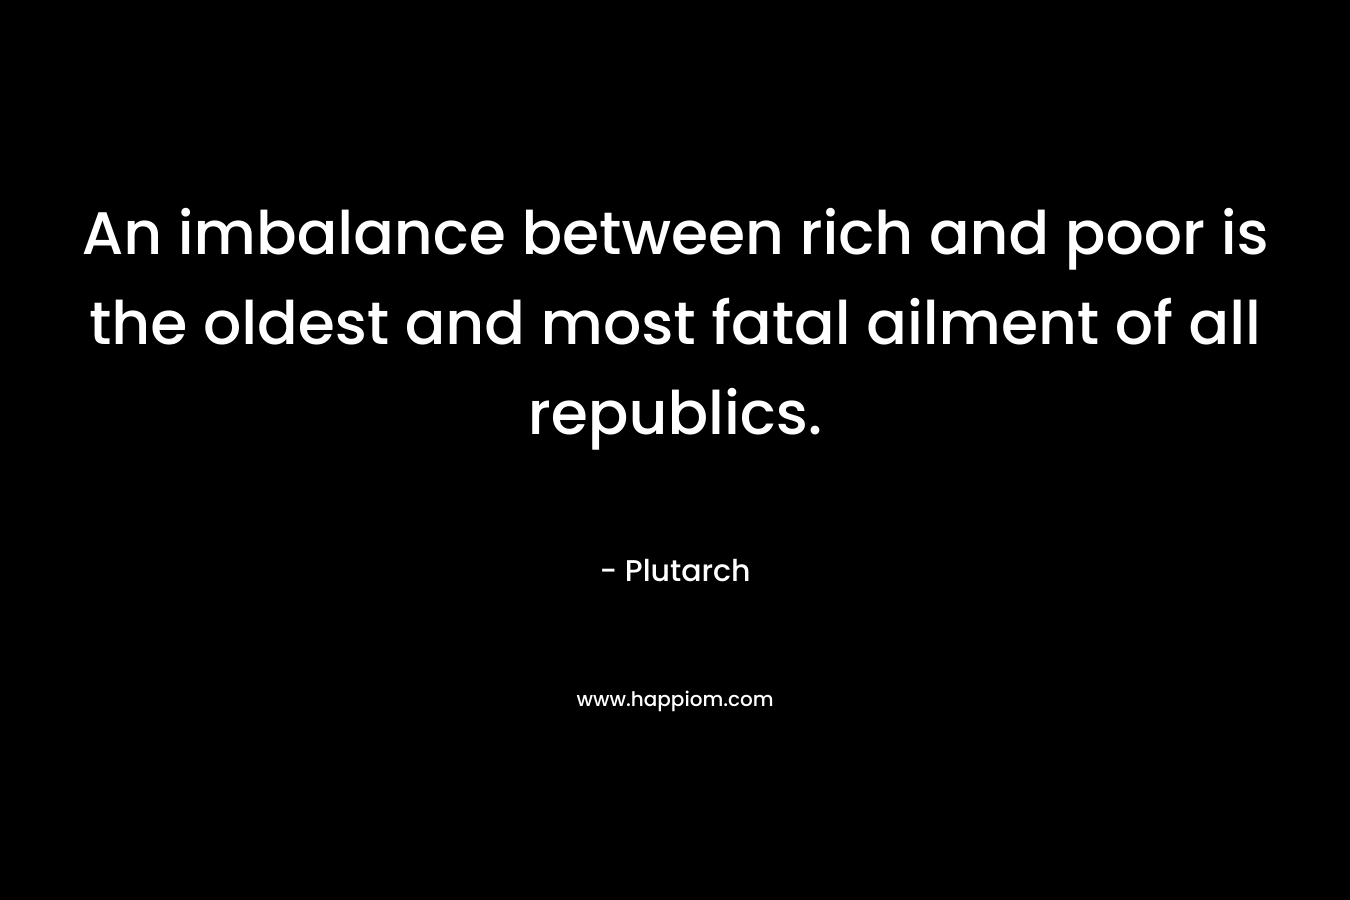 An imbalance between rich and poor is the oldest and most fatal ailment of all republics. – Plutarch